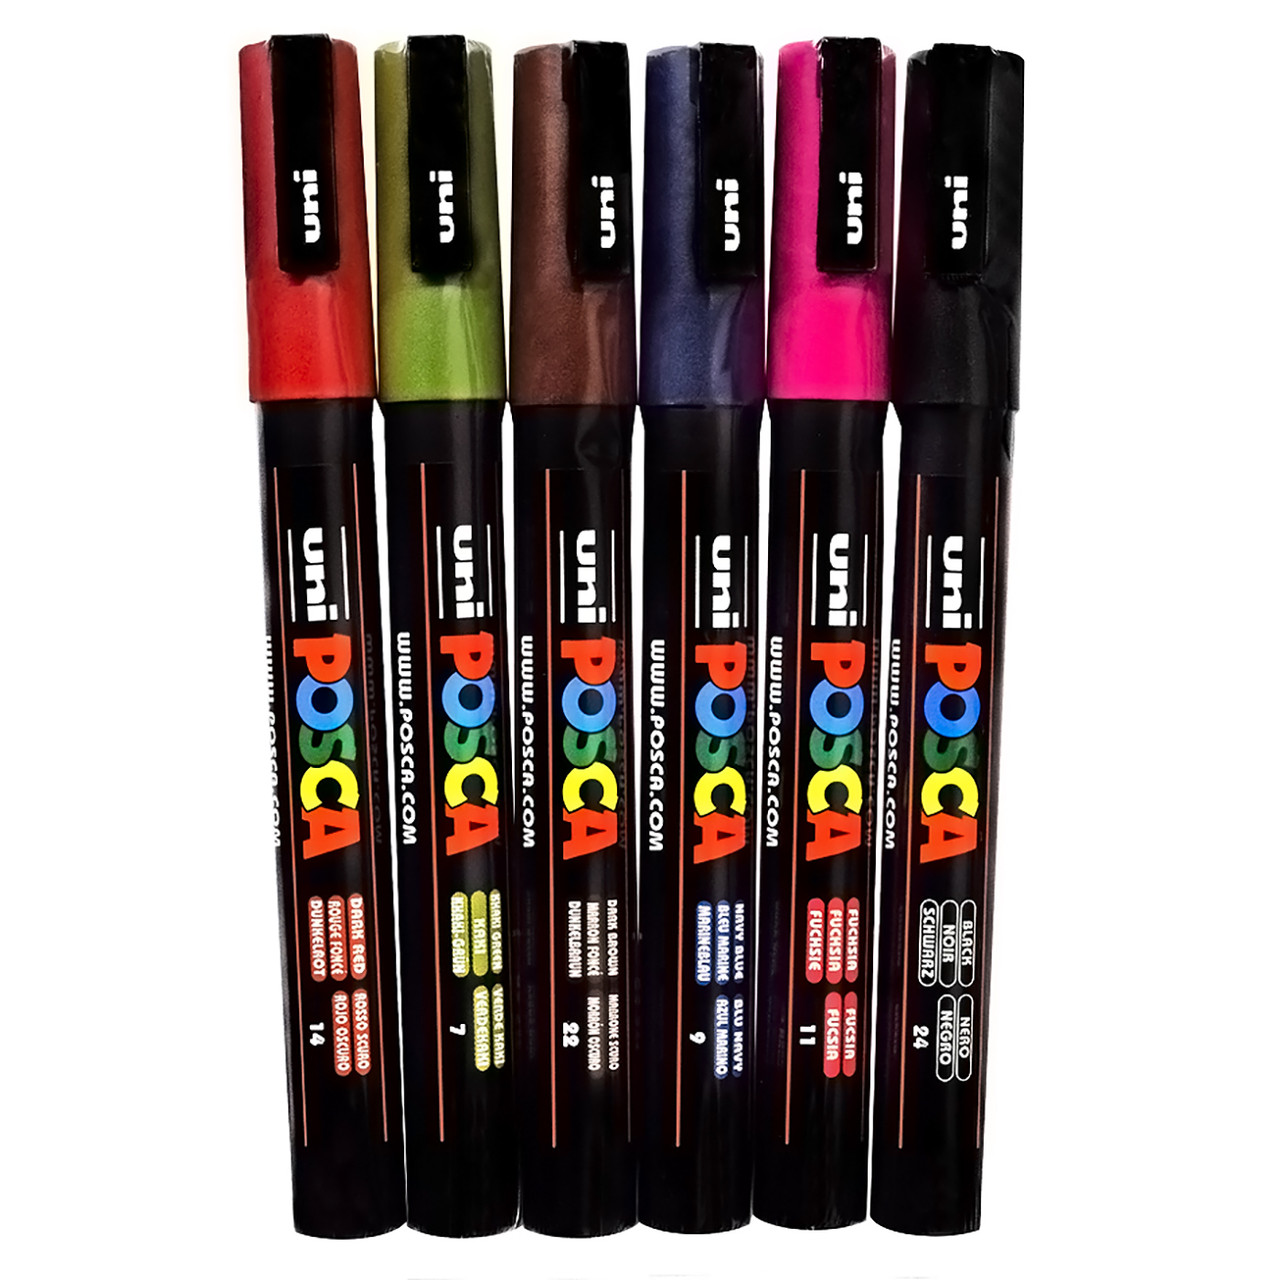 POSCA Markers PC-5M Set of 4 Primary Colours